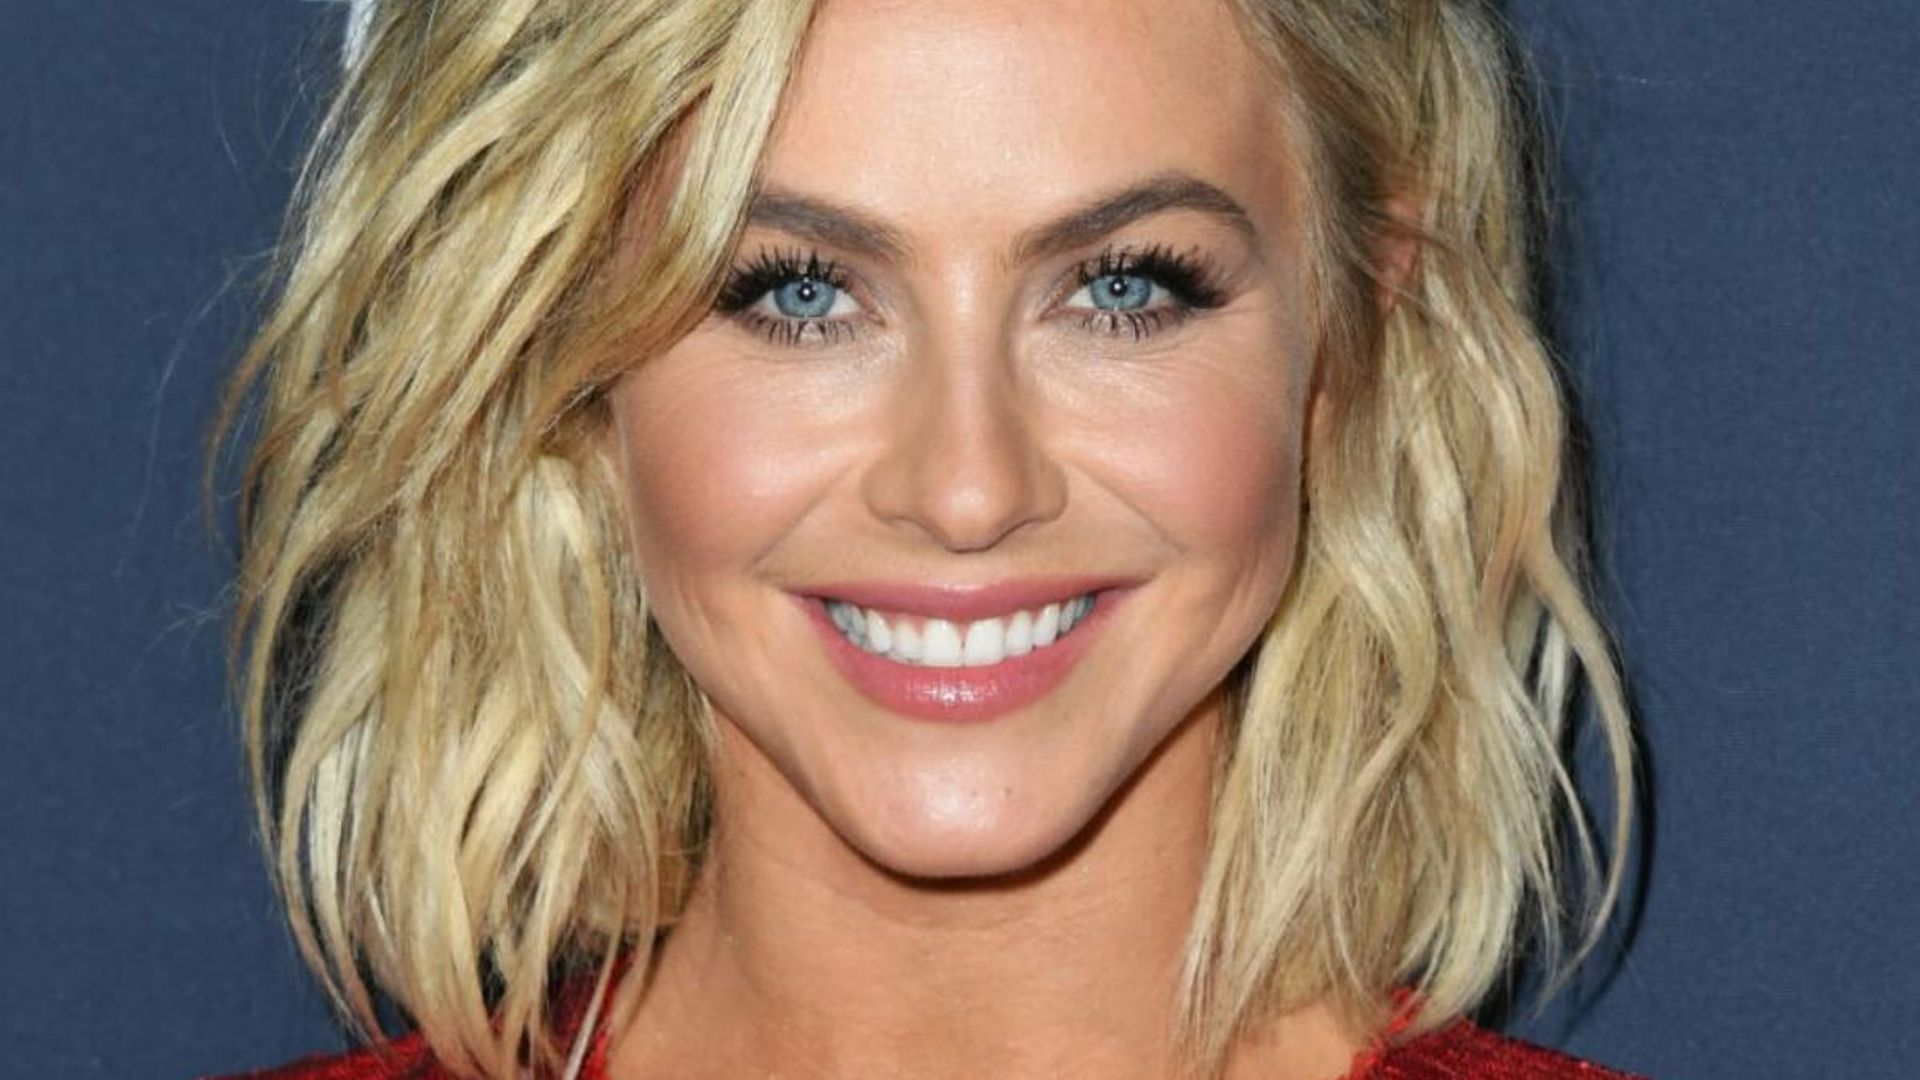 Julianne Hough sizzles in barely-there bikini on dreamy Italian vacation